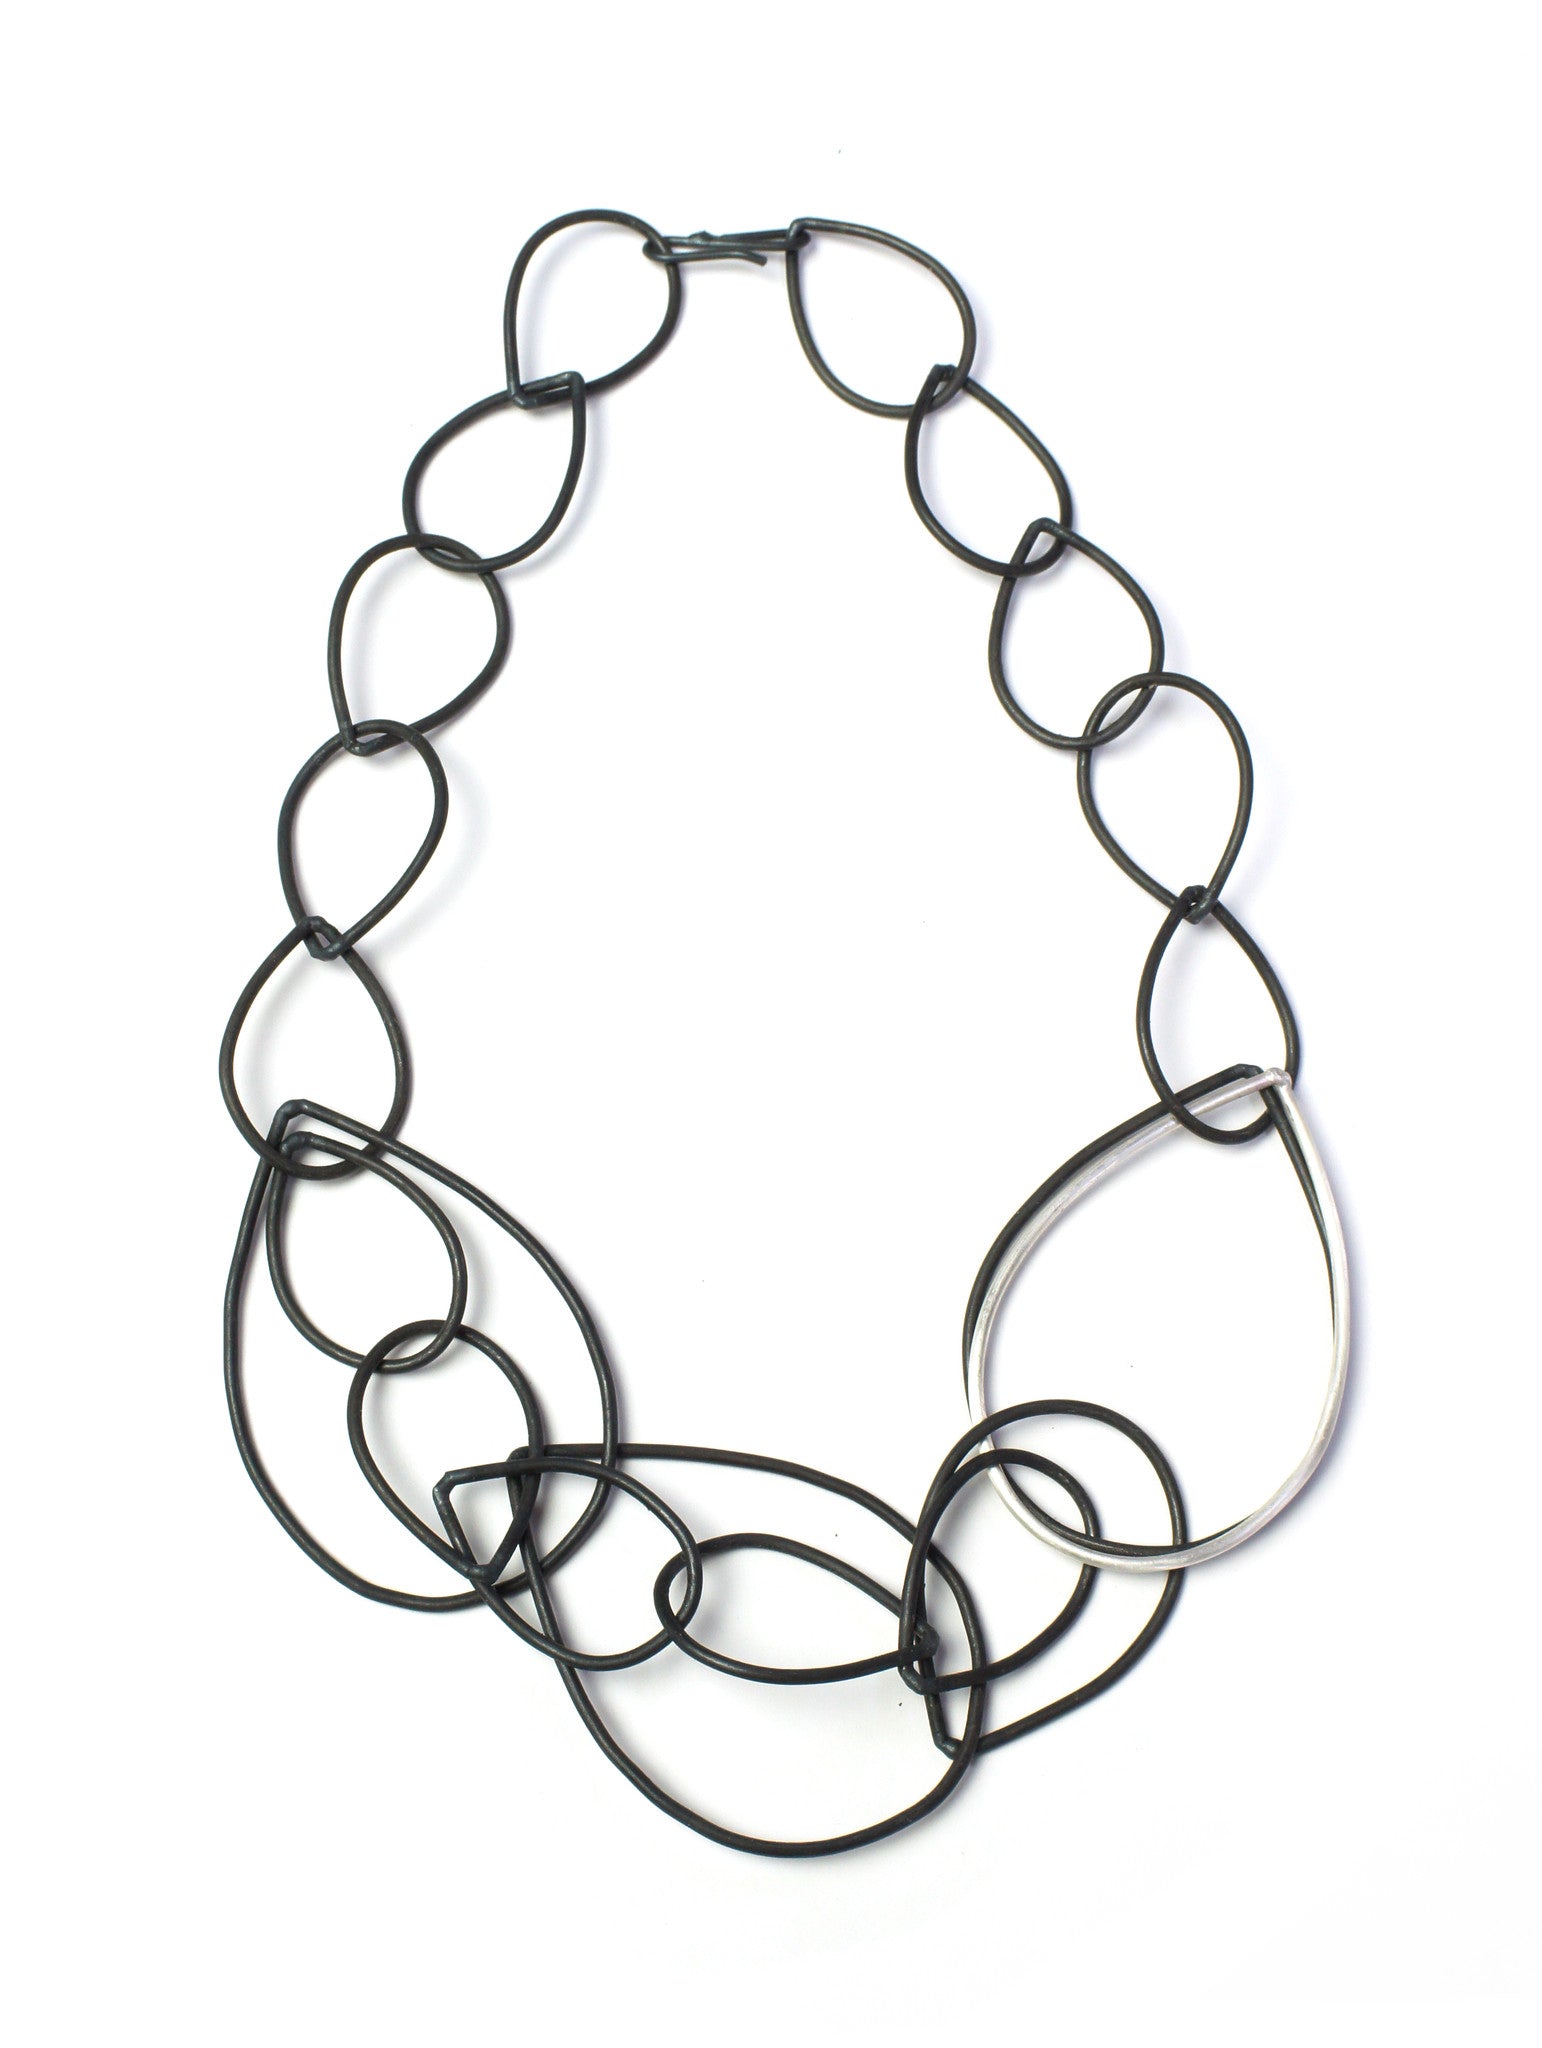 Daphne necklace in steel and silver